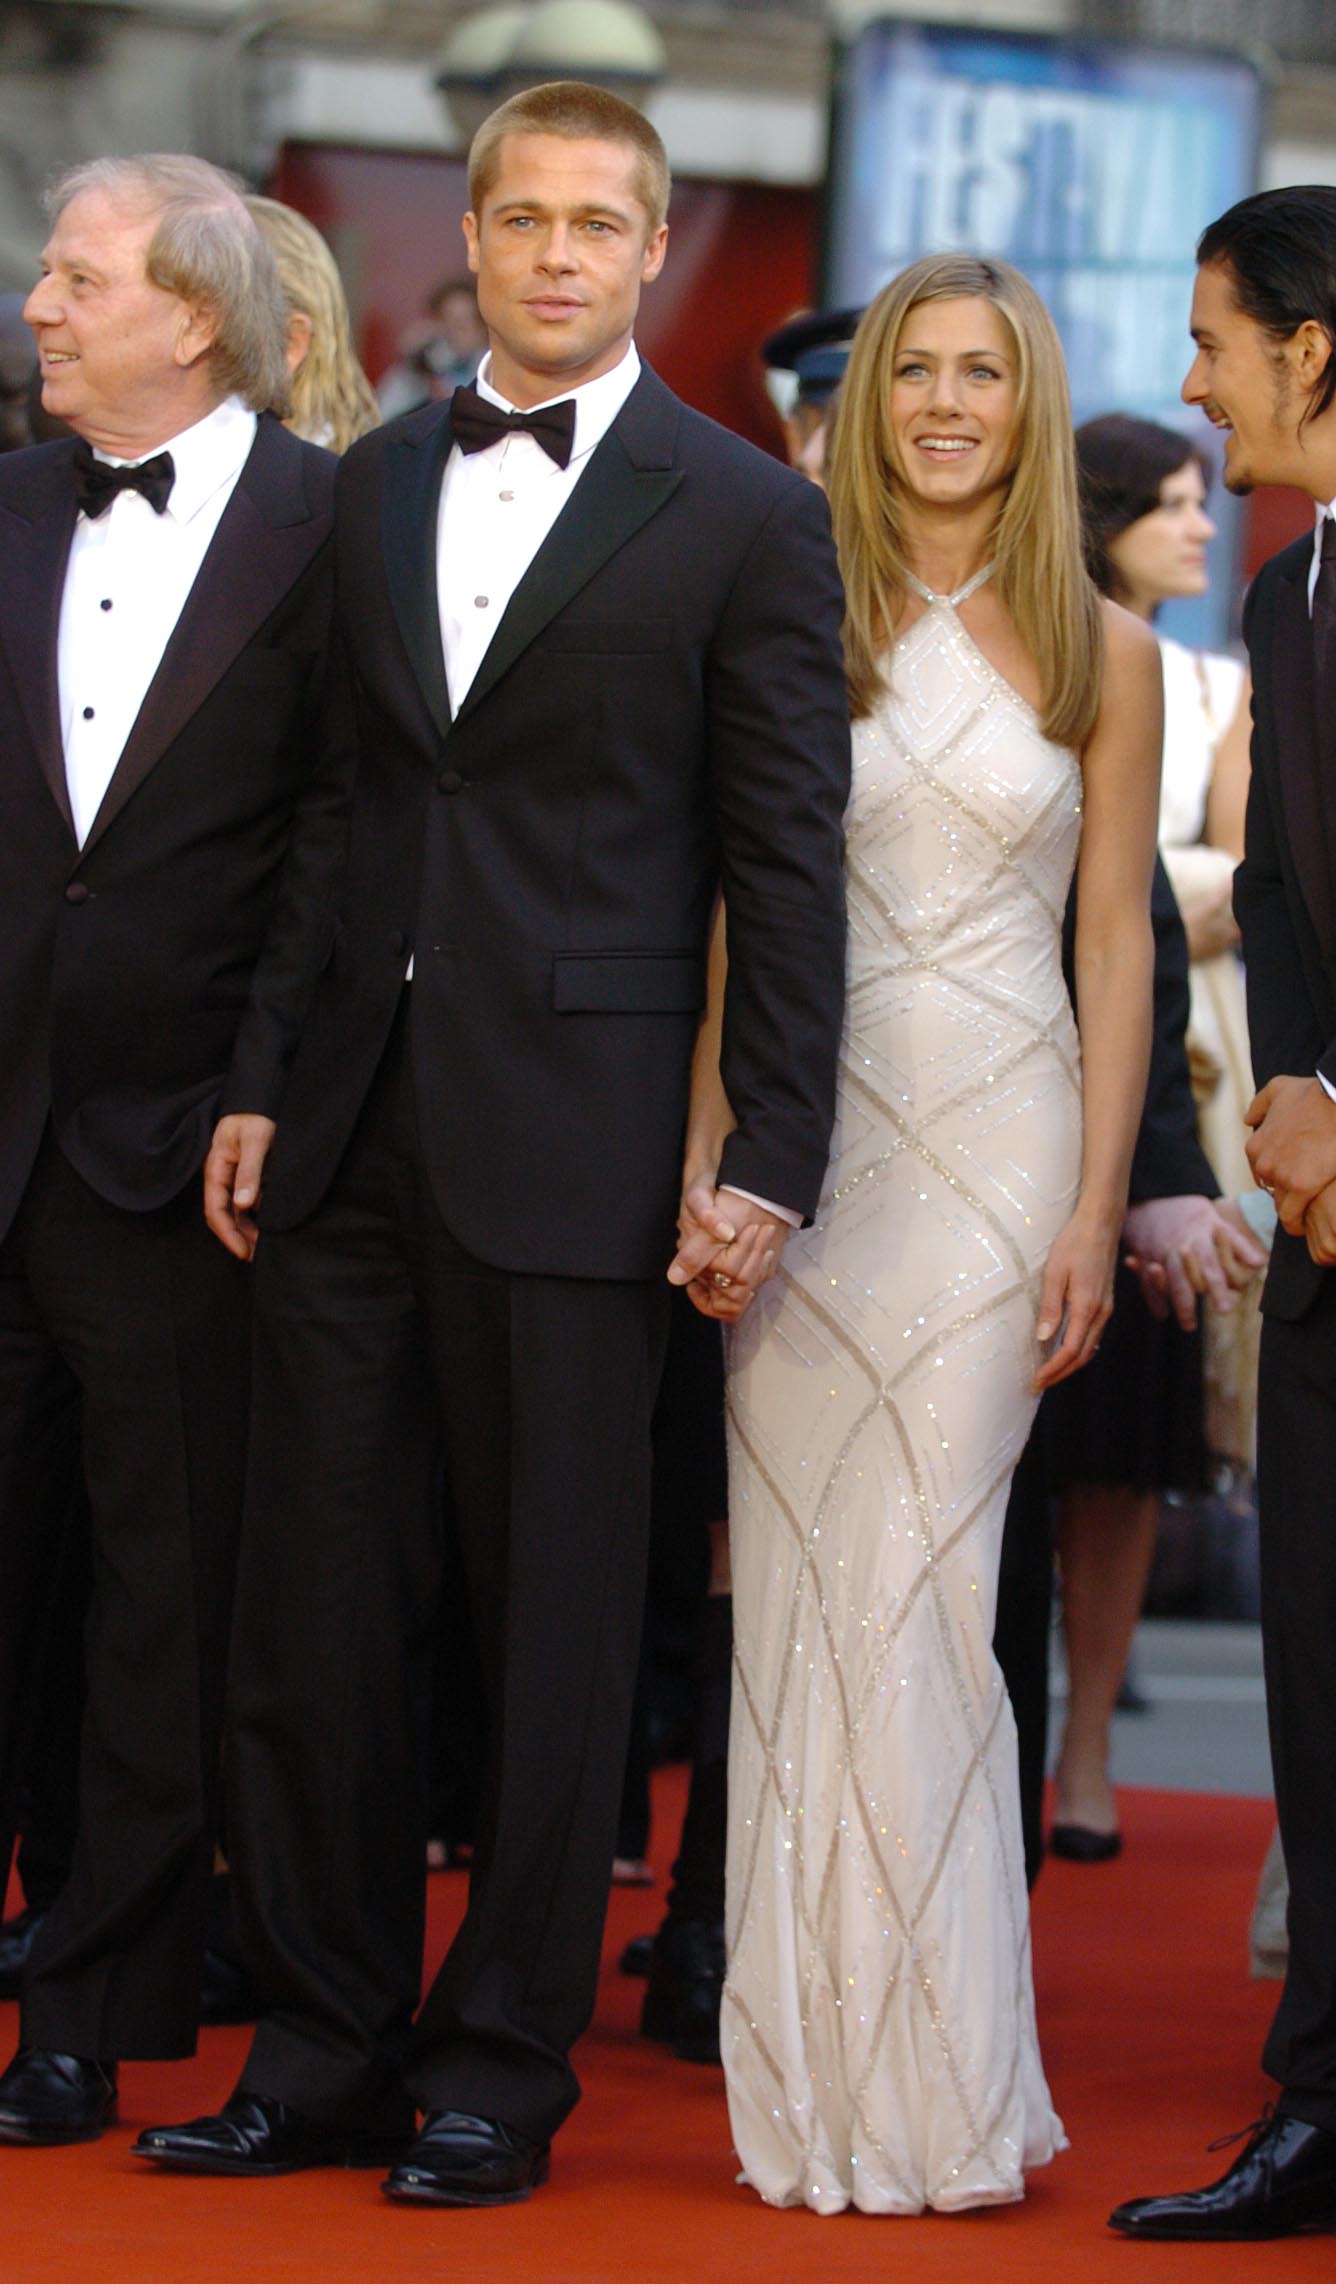 <p>Brad Pitt maintained for years that he did not cheat on first wife Jennifer Aniston with second wife Angelina Jolie. But in 2008, he admitted to Rolling Stone that he "fell in love" with Angie while they were filming "Mr. & Mrs. Smith" together in 2004 -- when he was still married to Jen. That same year, Angelina admitted the same thing, telling The New York Times she couldn't wait for their kids to see "Mr. & Mrs. Smith" someday because "not a lot of people get to see a movie where their parents fell in love." Angelina filed for divorce in September 2016.</p>